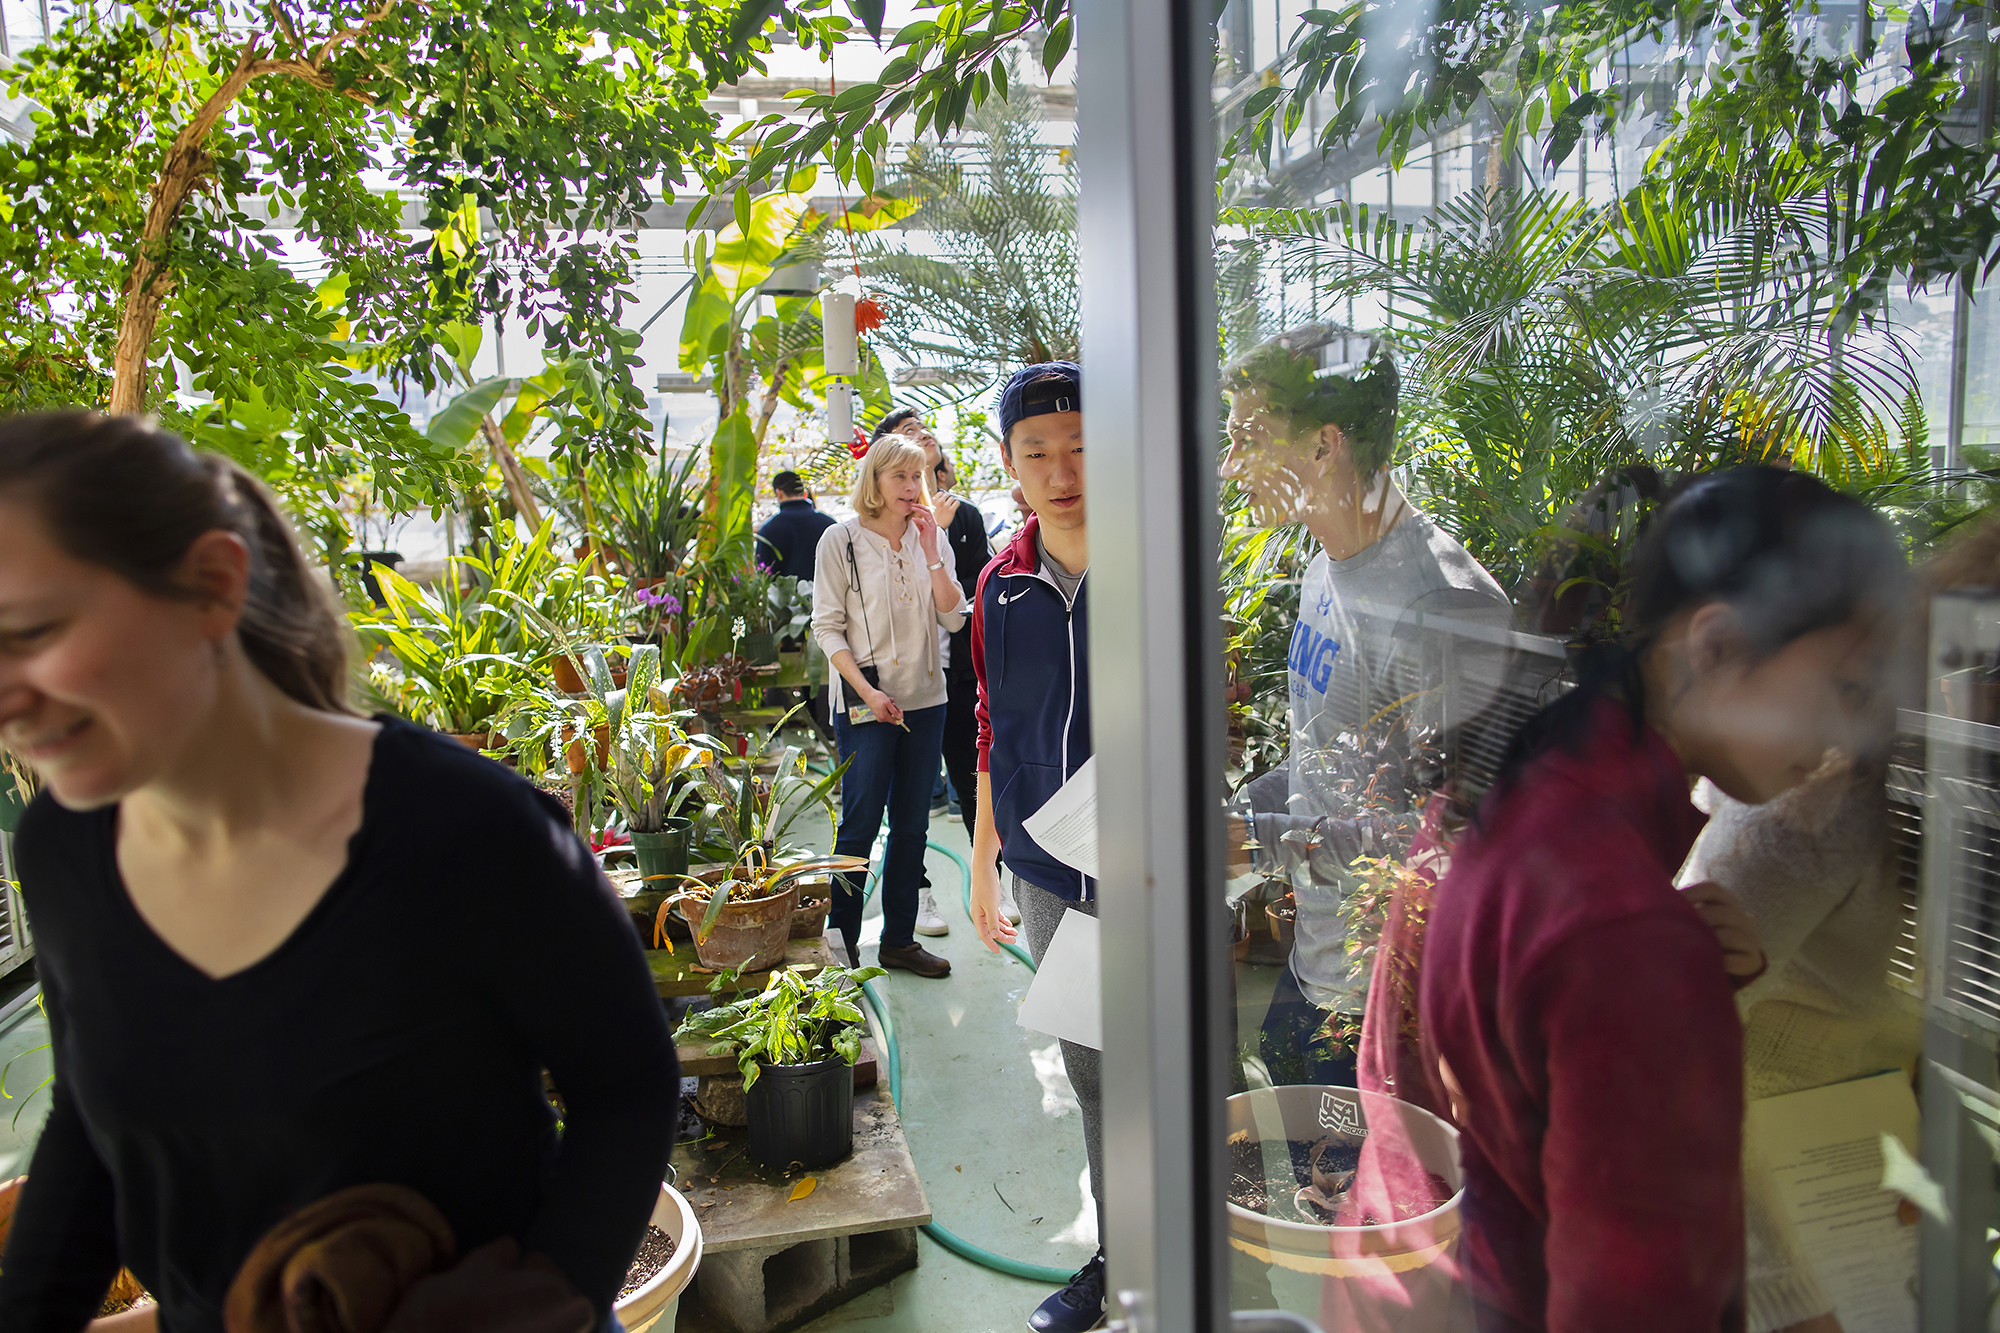 Viewed partially through a glass door, people look around a greenhouse filled with vibrant green plants, some flowering.